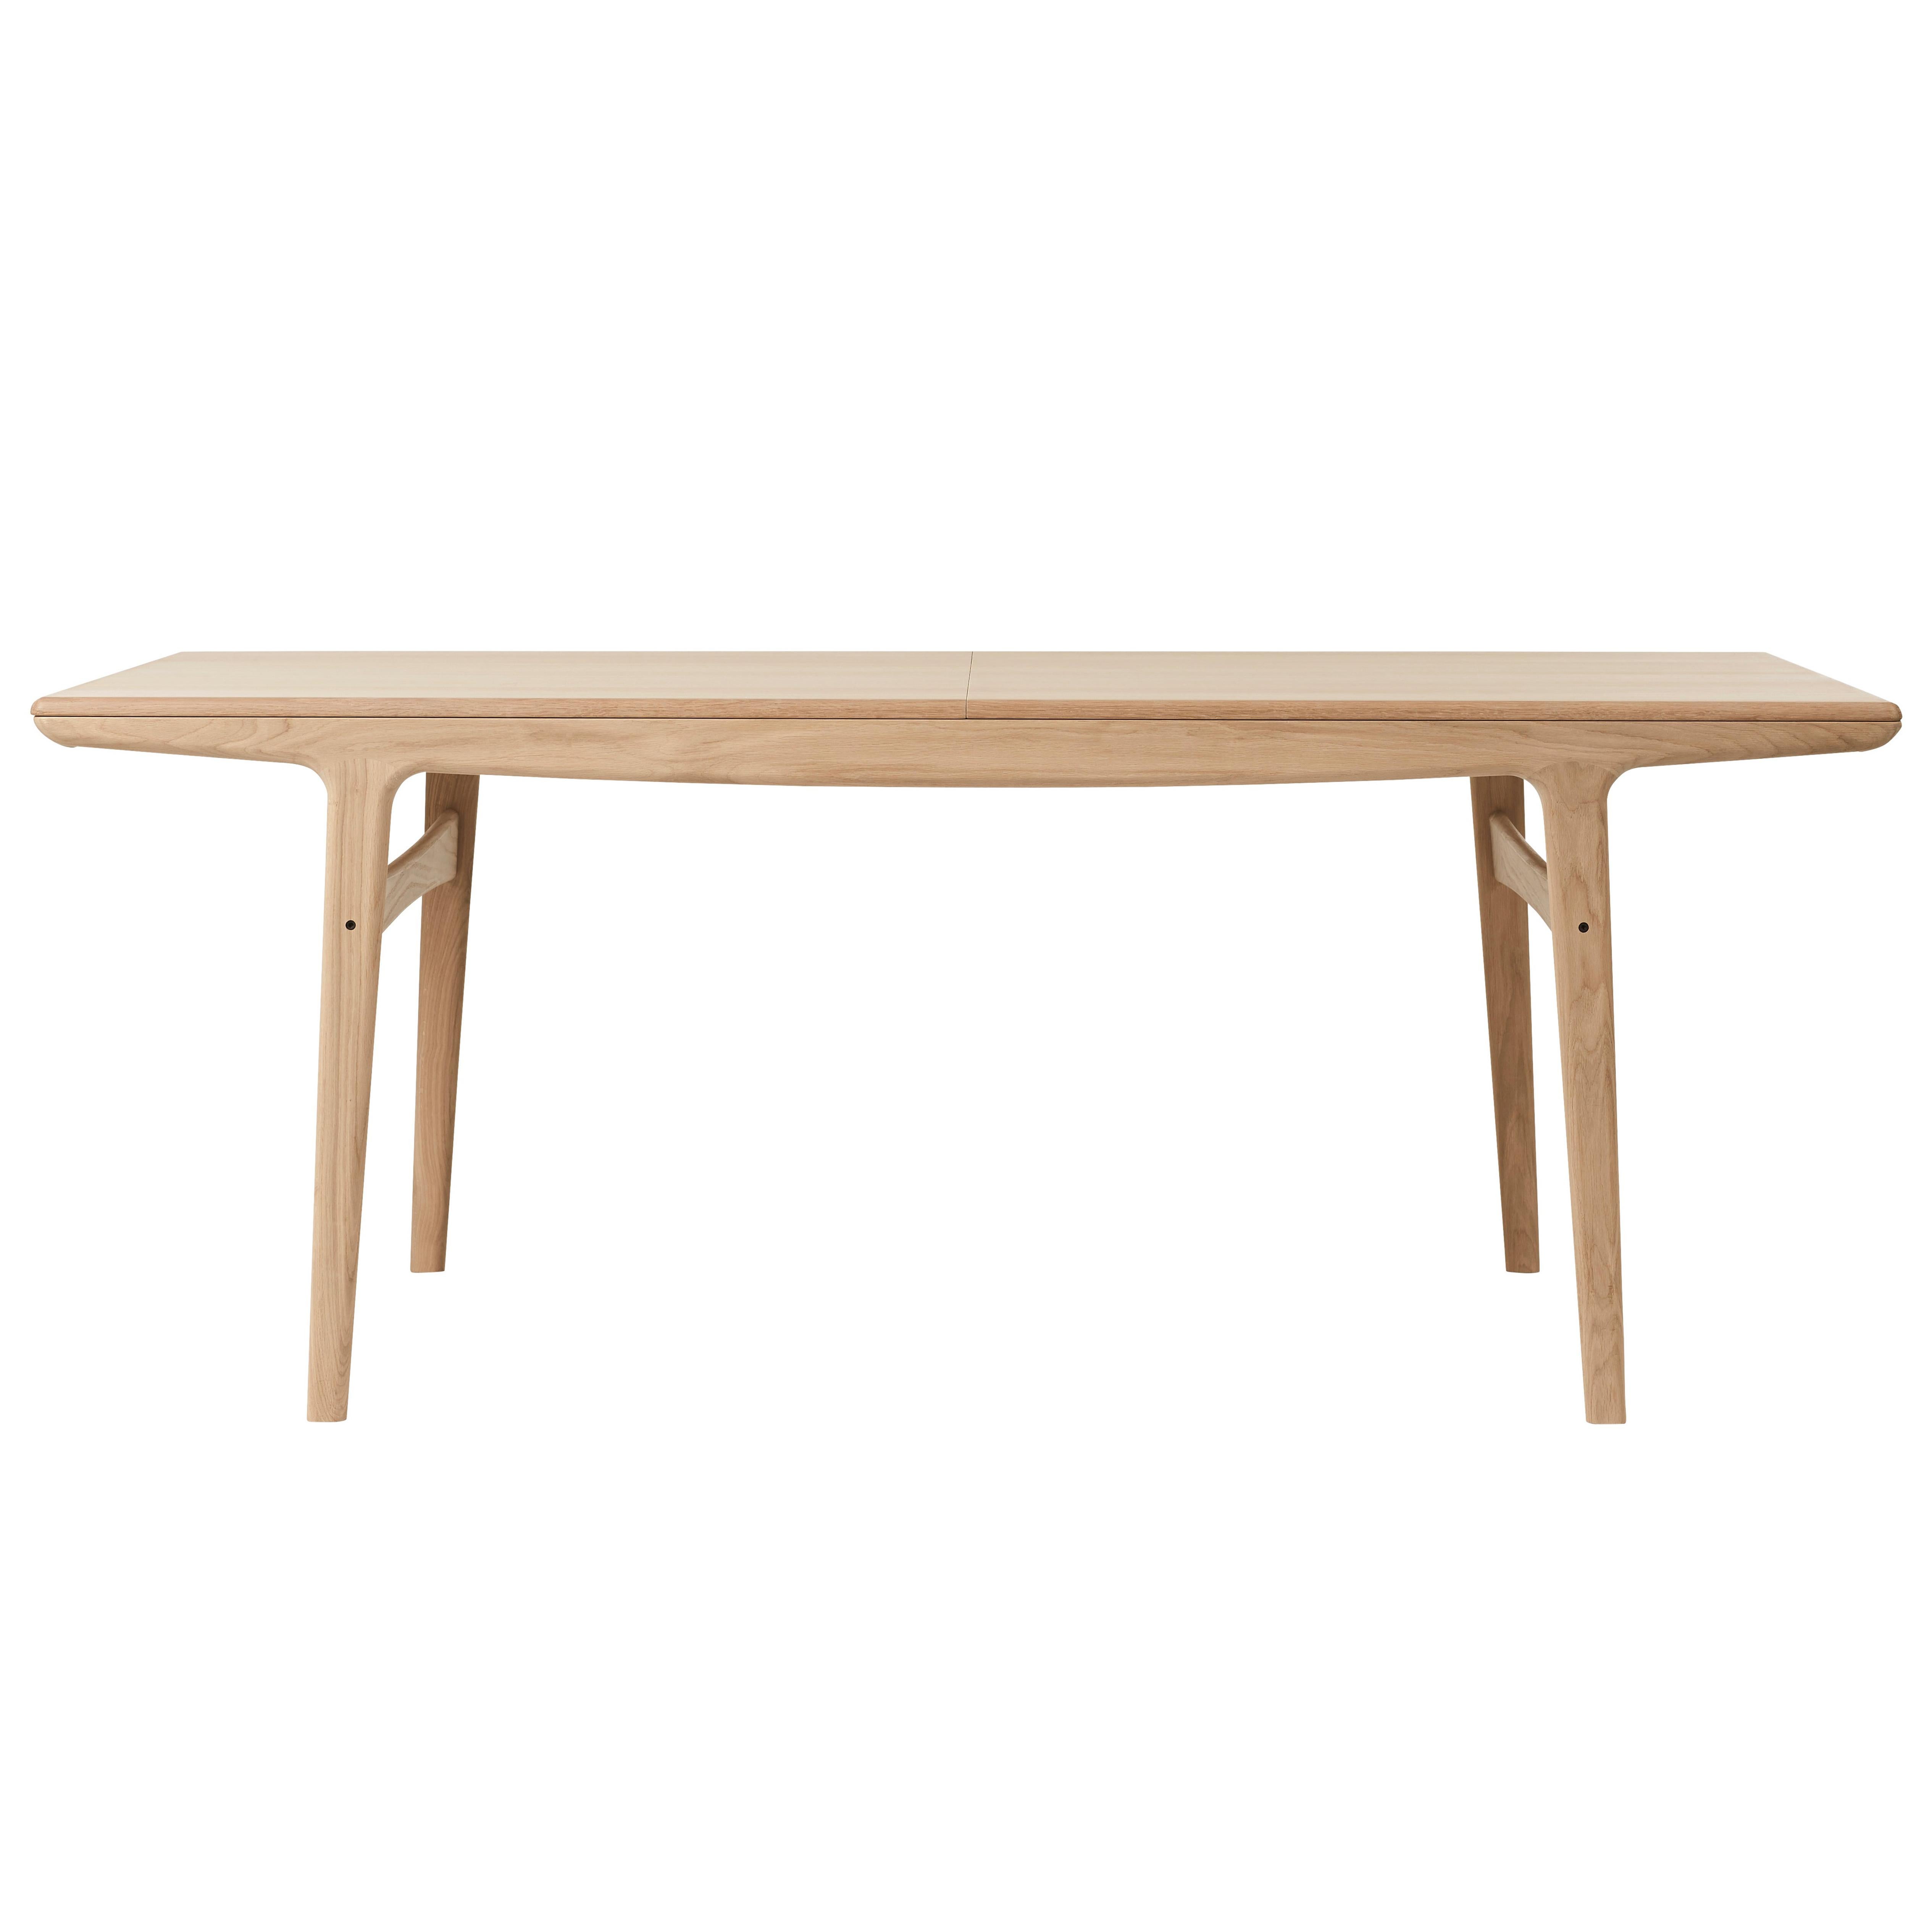 Evermore Large Dining Table, by Arne Hovmand-Olsen from Warm Nordic